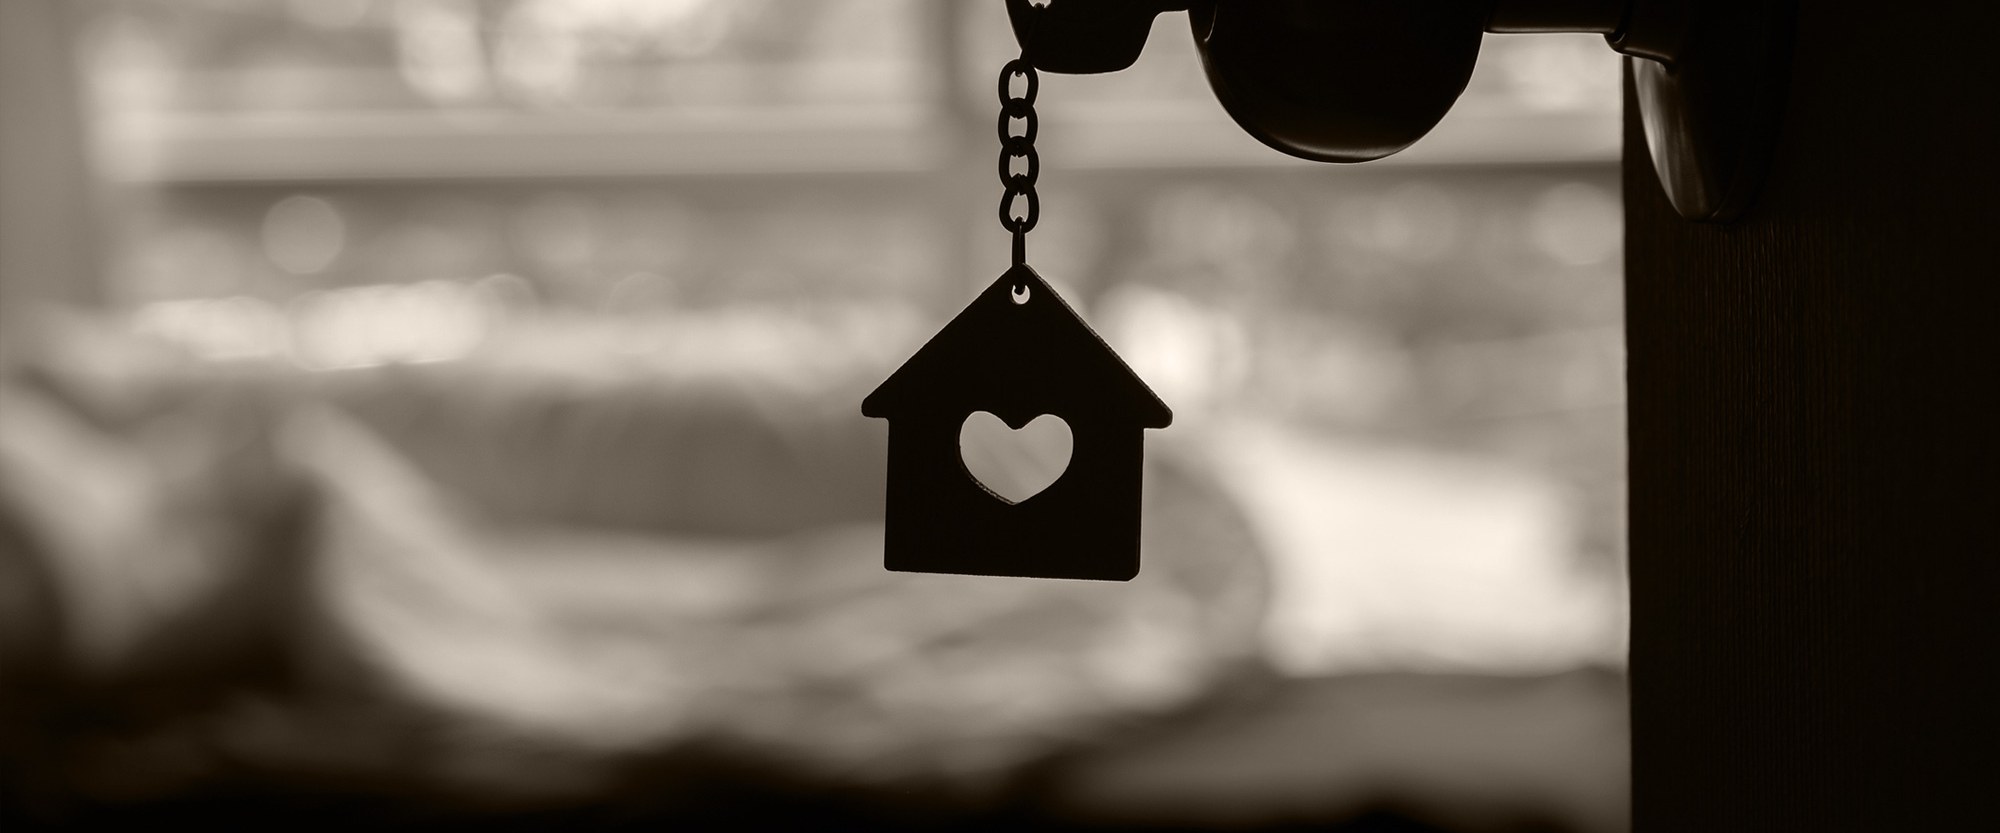 Key in door with a house with a heart keychain dangling